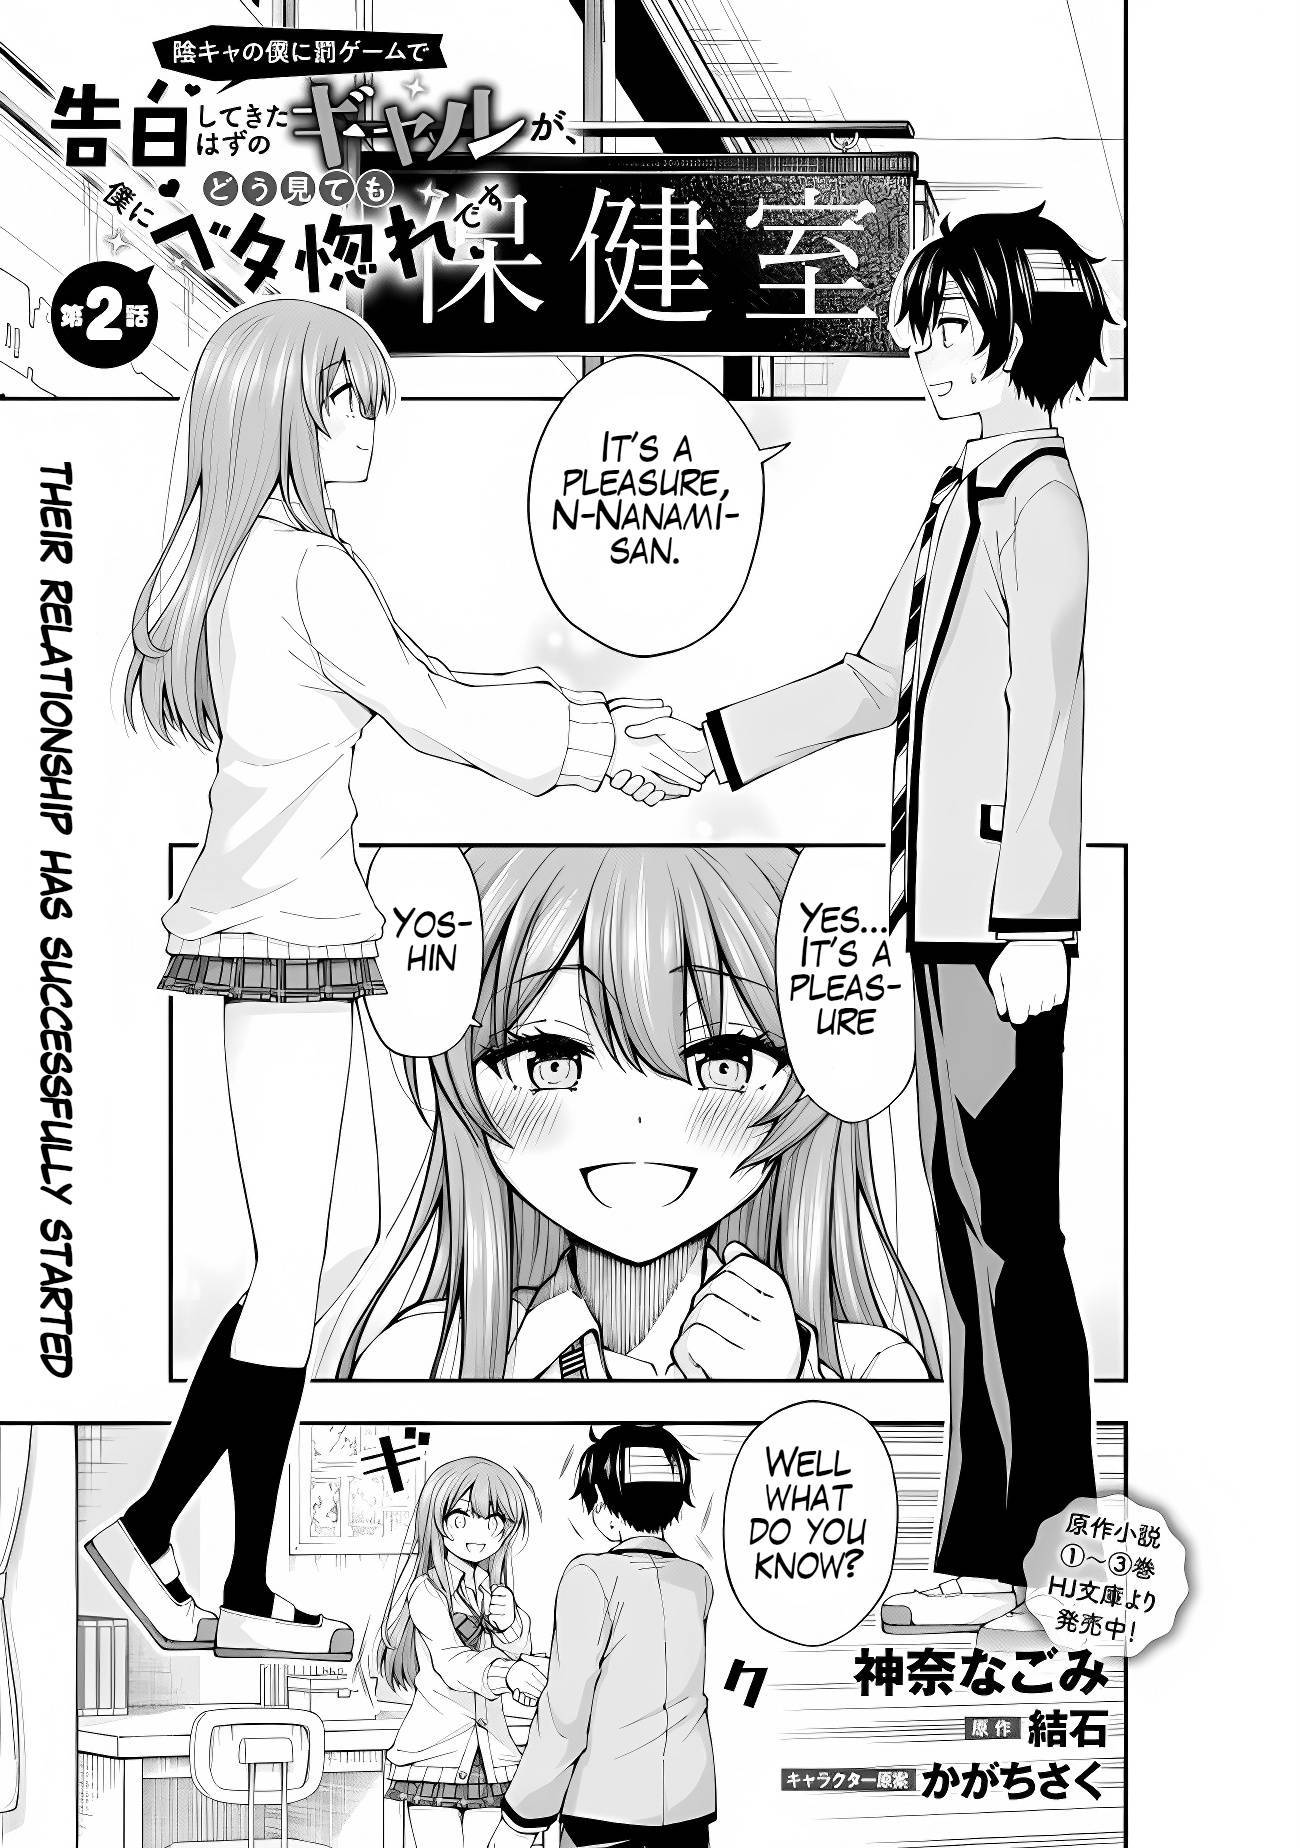 The Gal Who Was Meant to Confess to Me as a Game Punishment - chapter 2 - #1